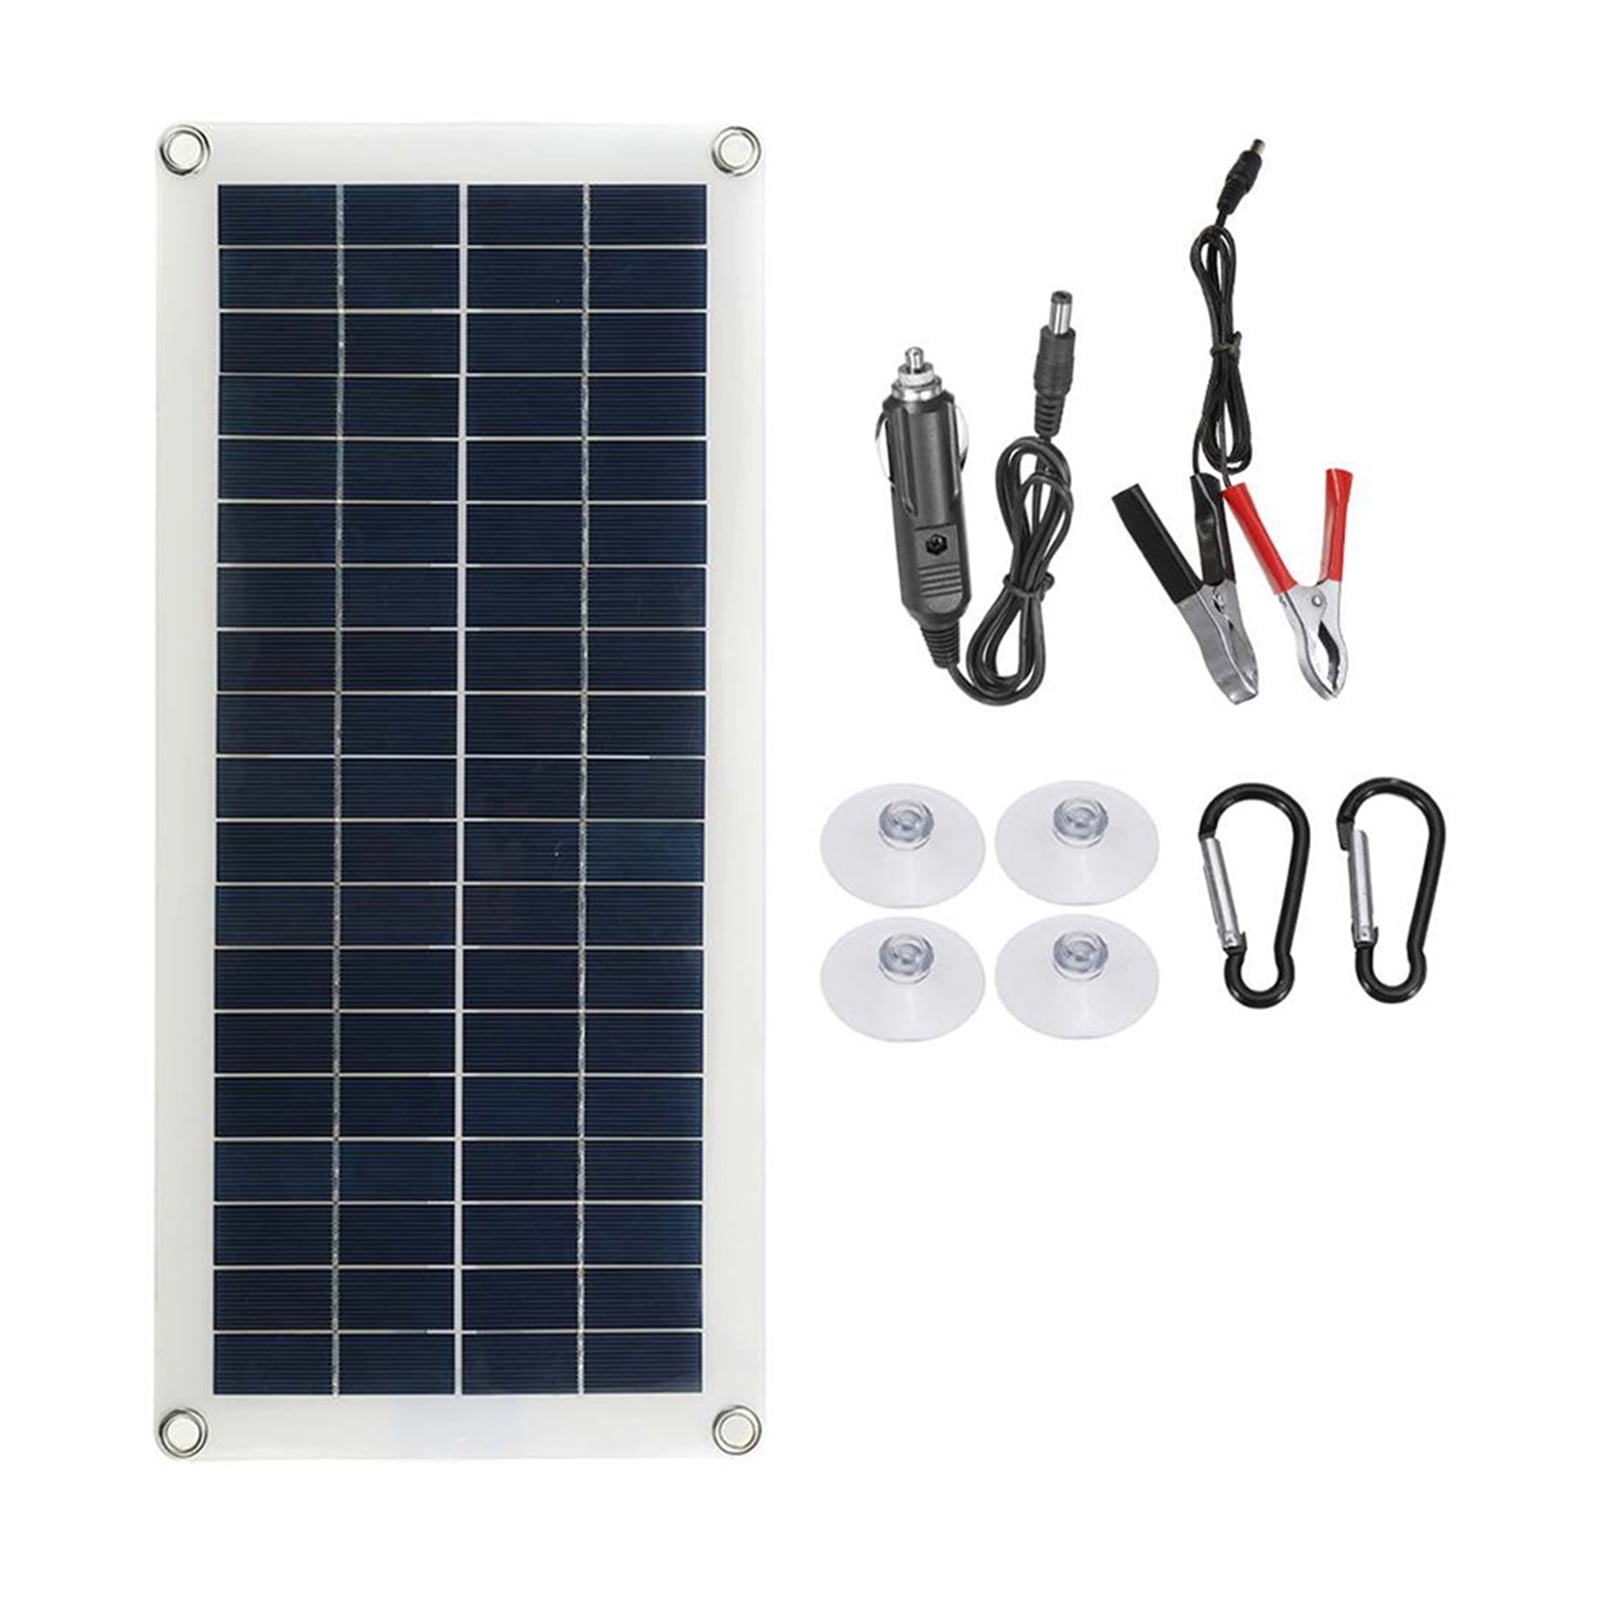 Details about   Solar Panel Kit Foldable 10W Outdoor Solar Panel Charger Power Station Generator 